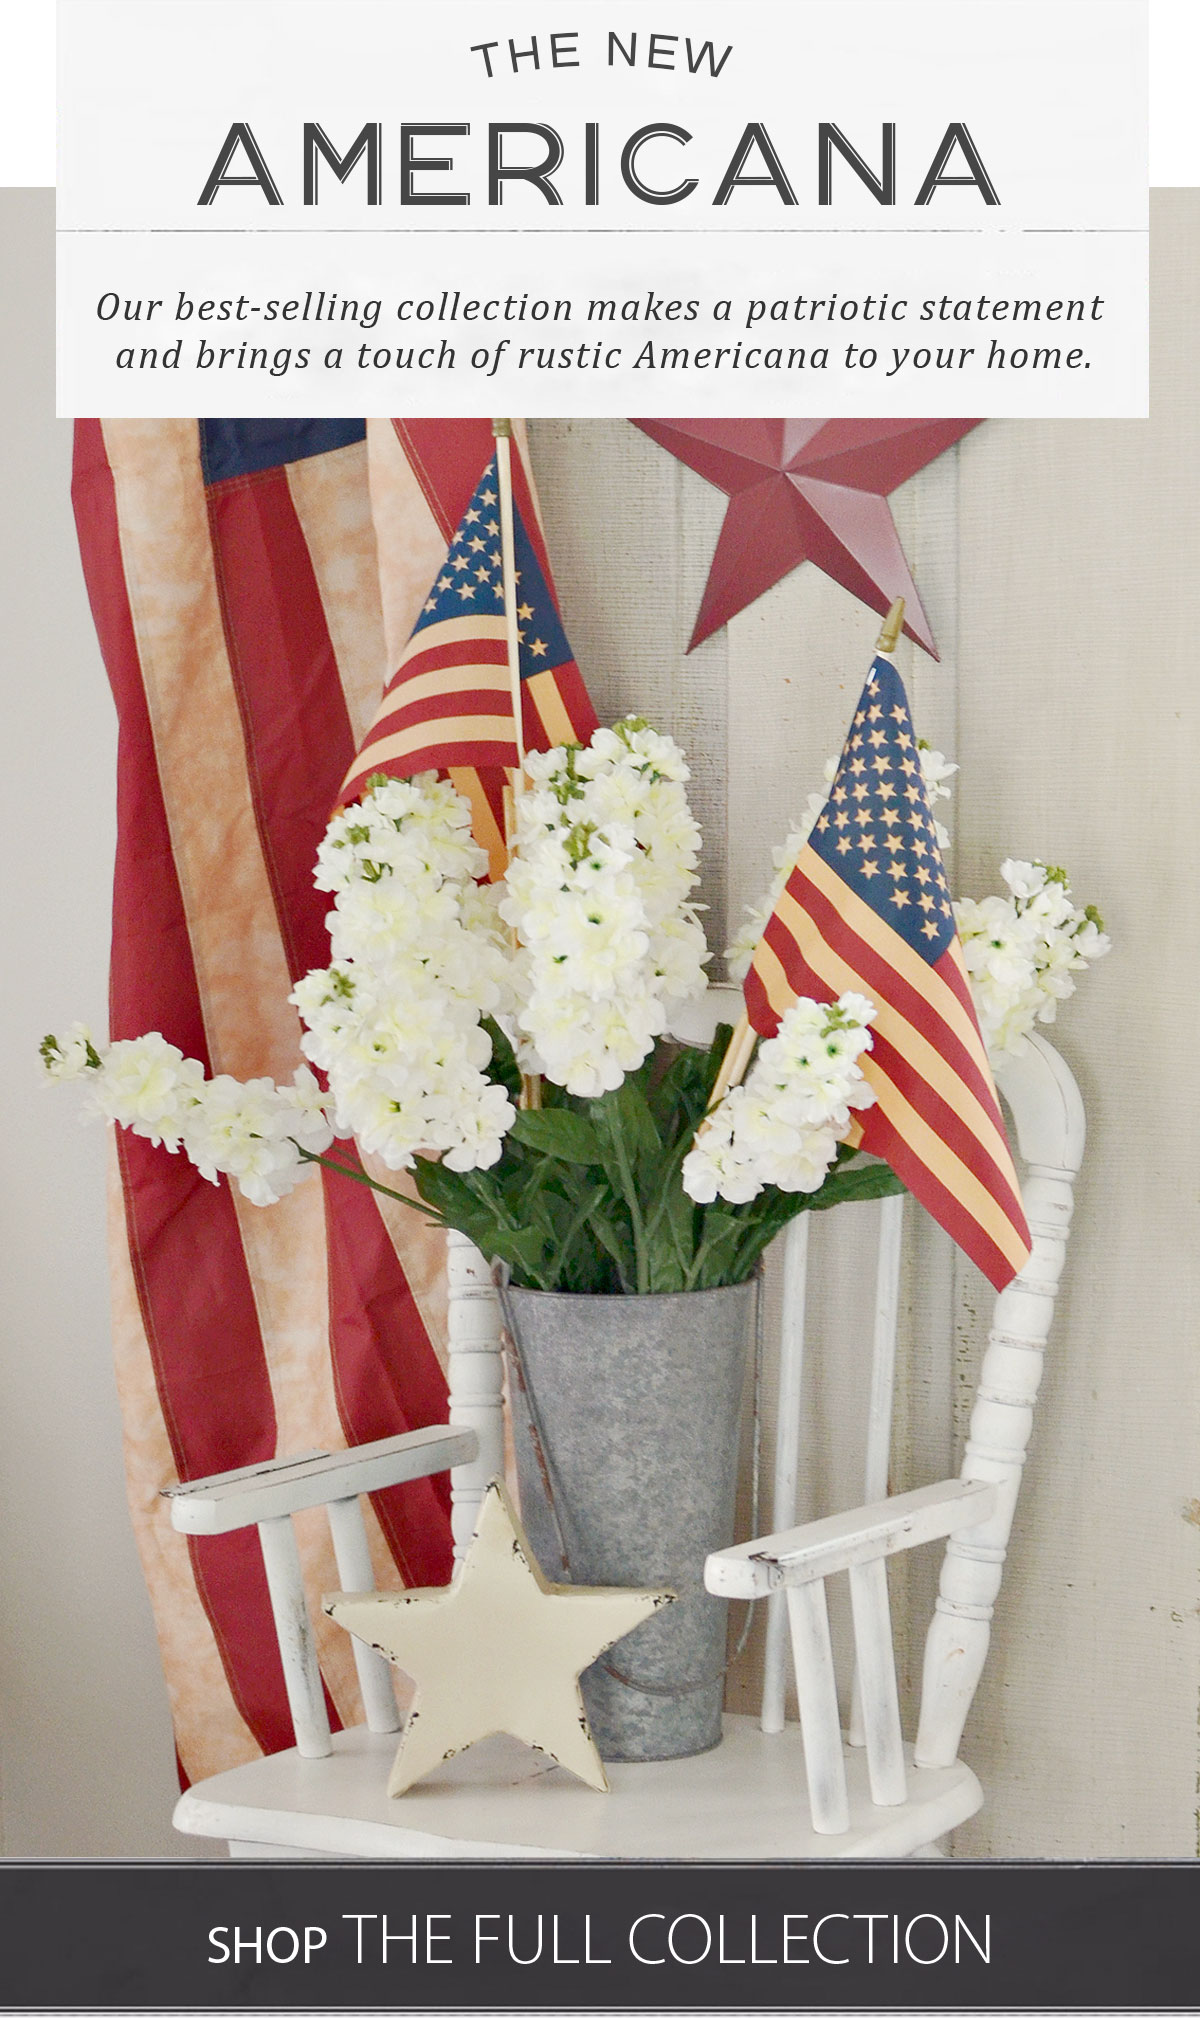 The New Americana Our best-selling collection makes a patriotic statement and brings a touch of rustic Americana to your home. Shop the Full Collection